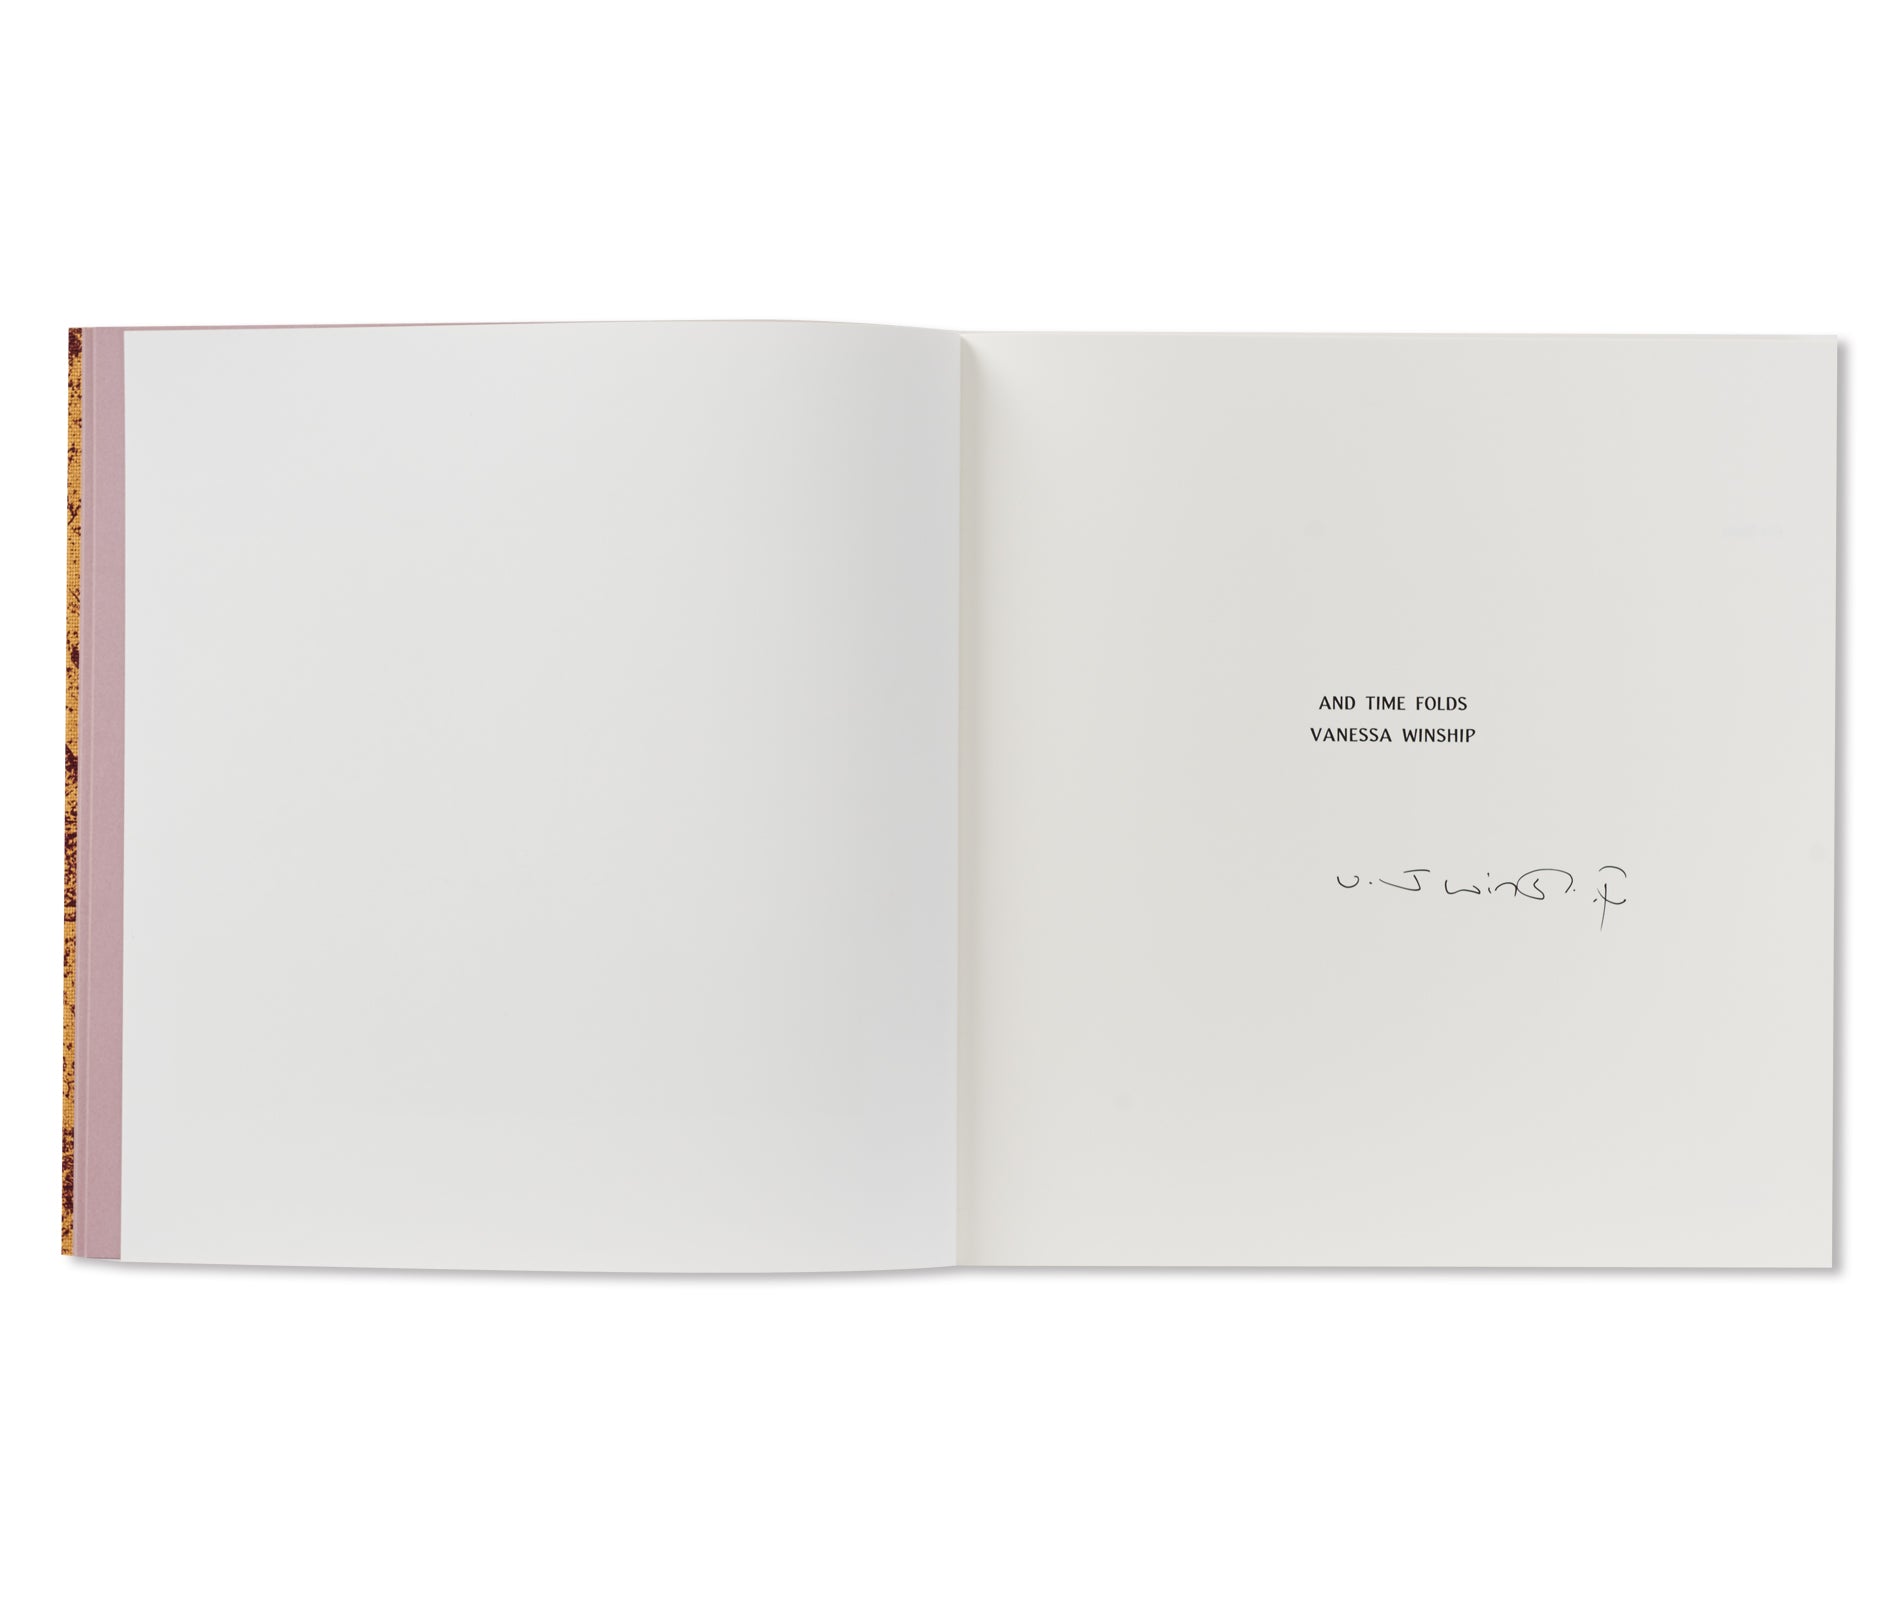 AND TIME FOLDS by Vanessa Winship [SIGNED]